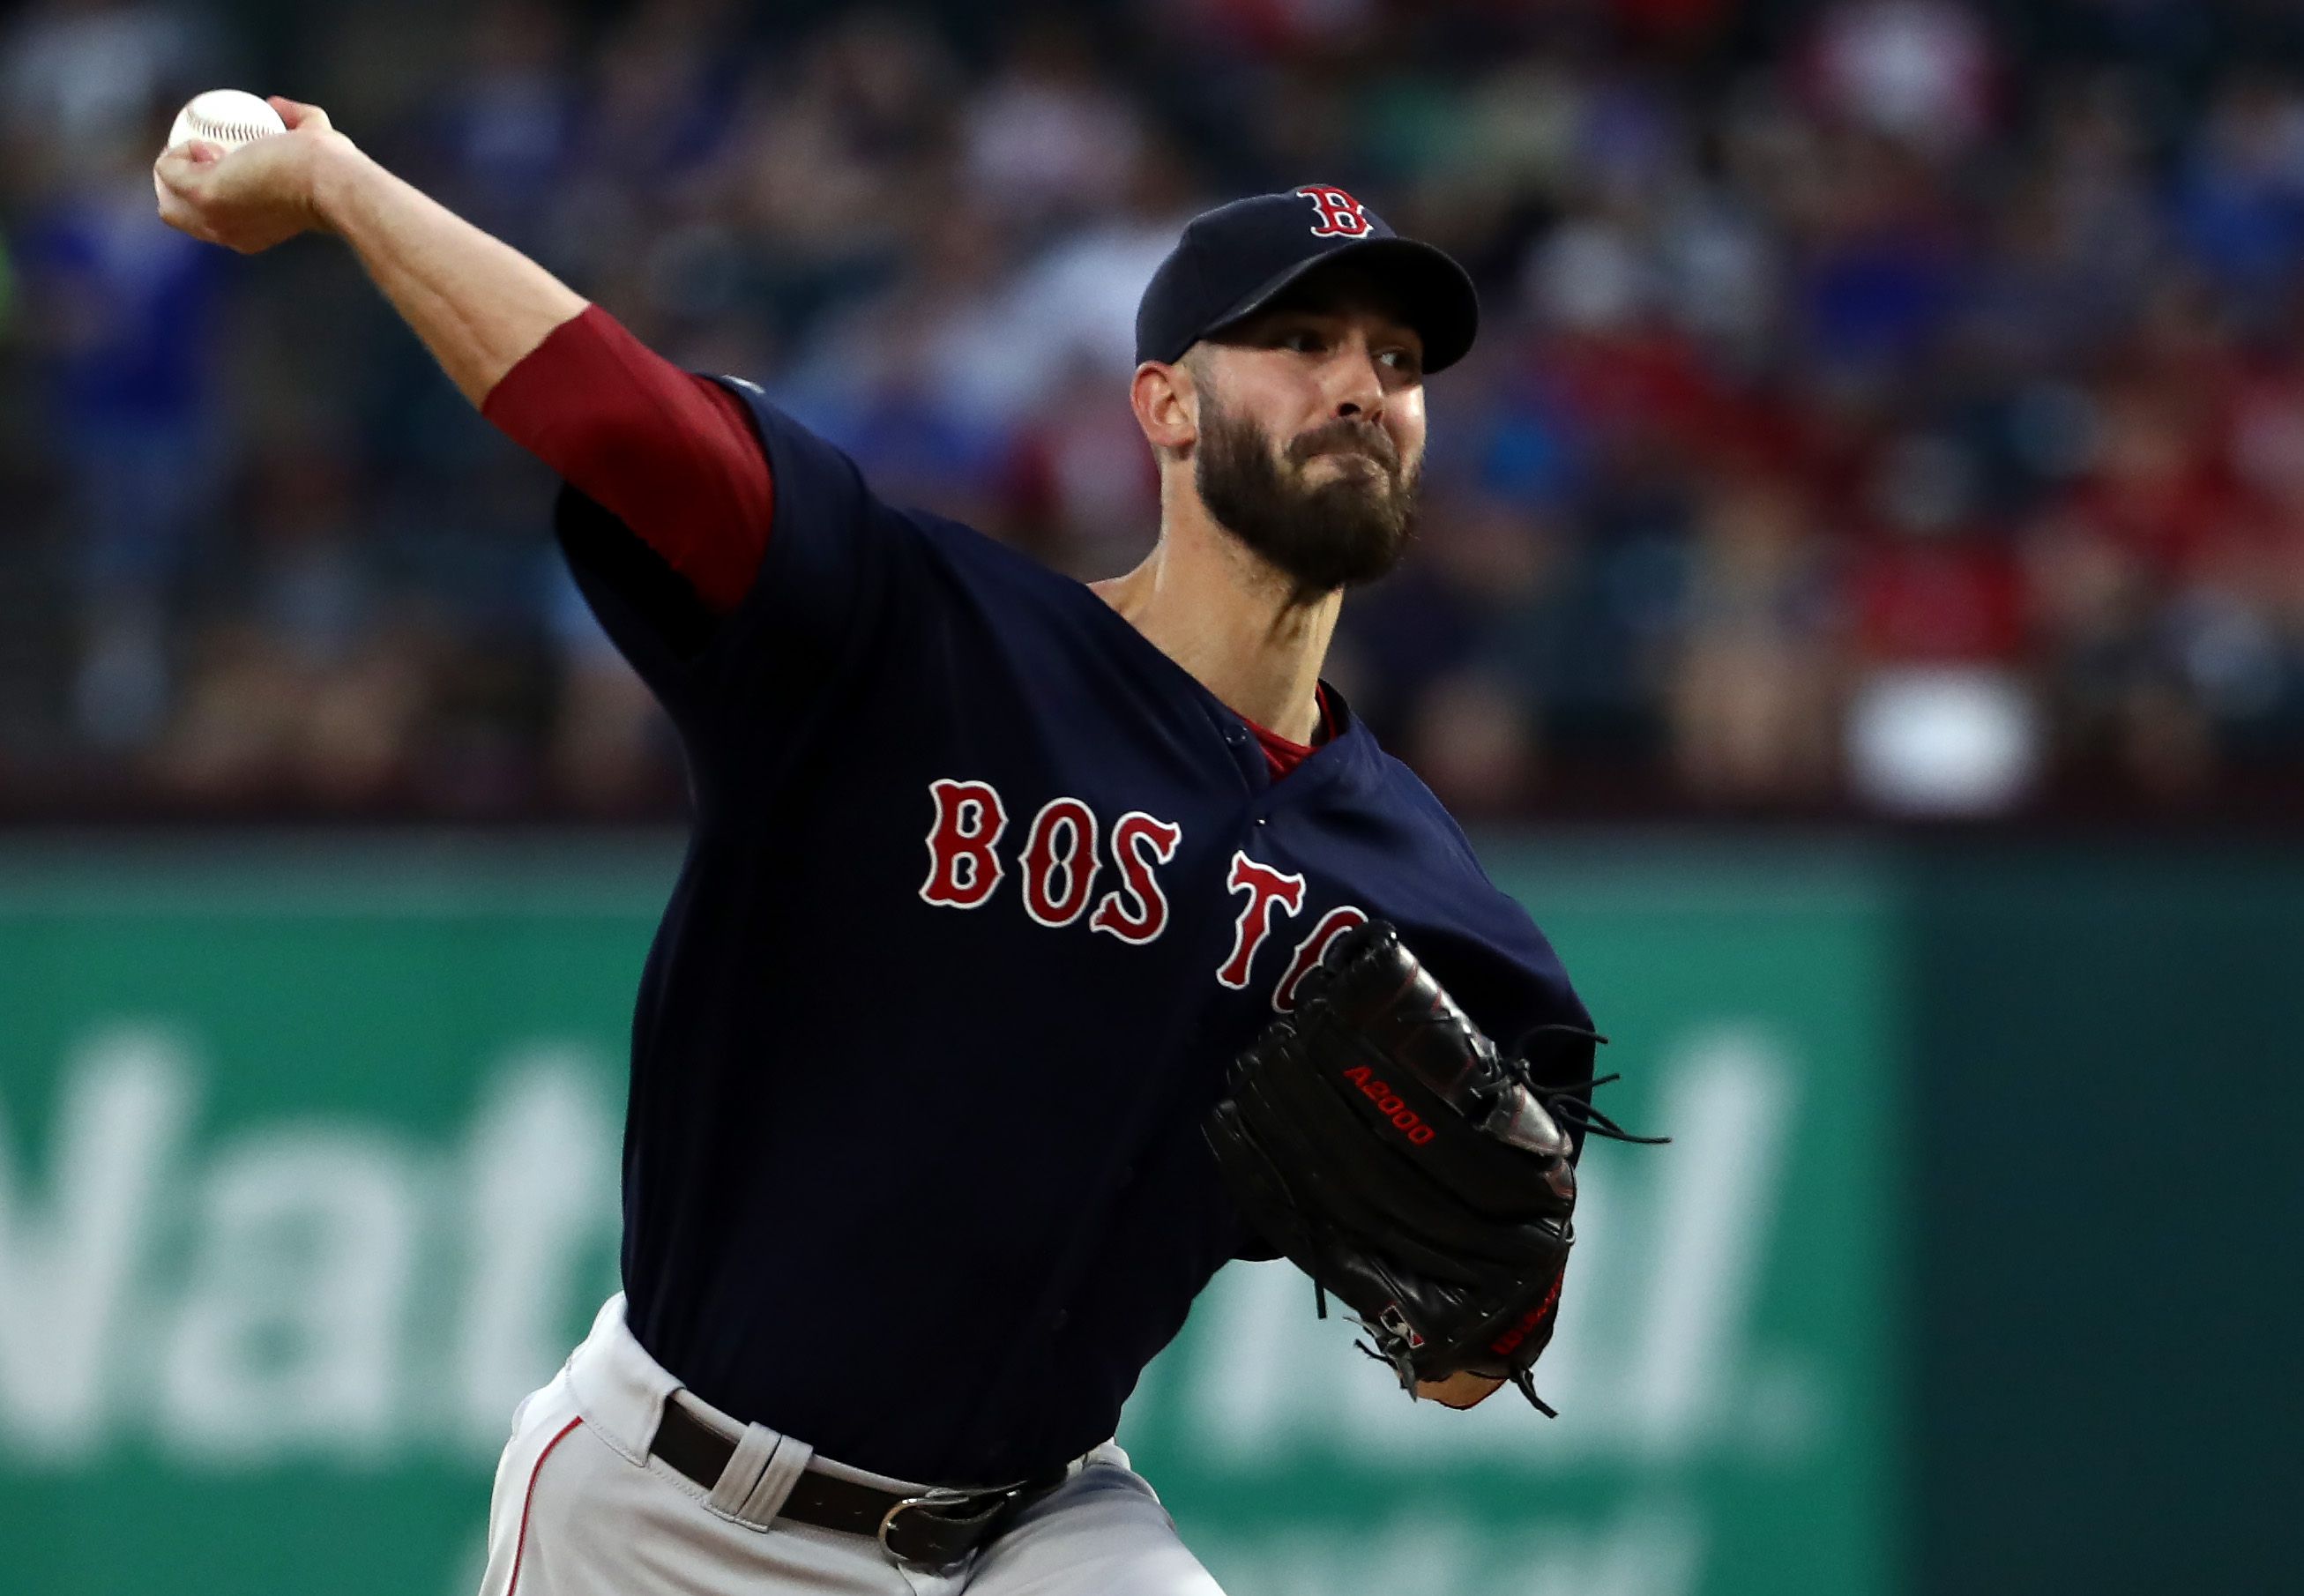 Rick Porcello's latest outing impressed a Hall of Famer - The Boston Globe